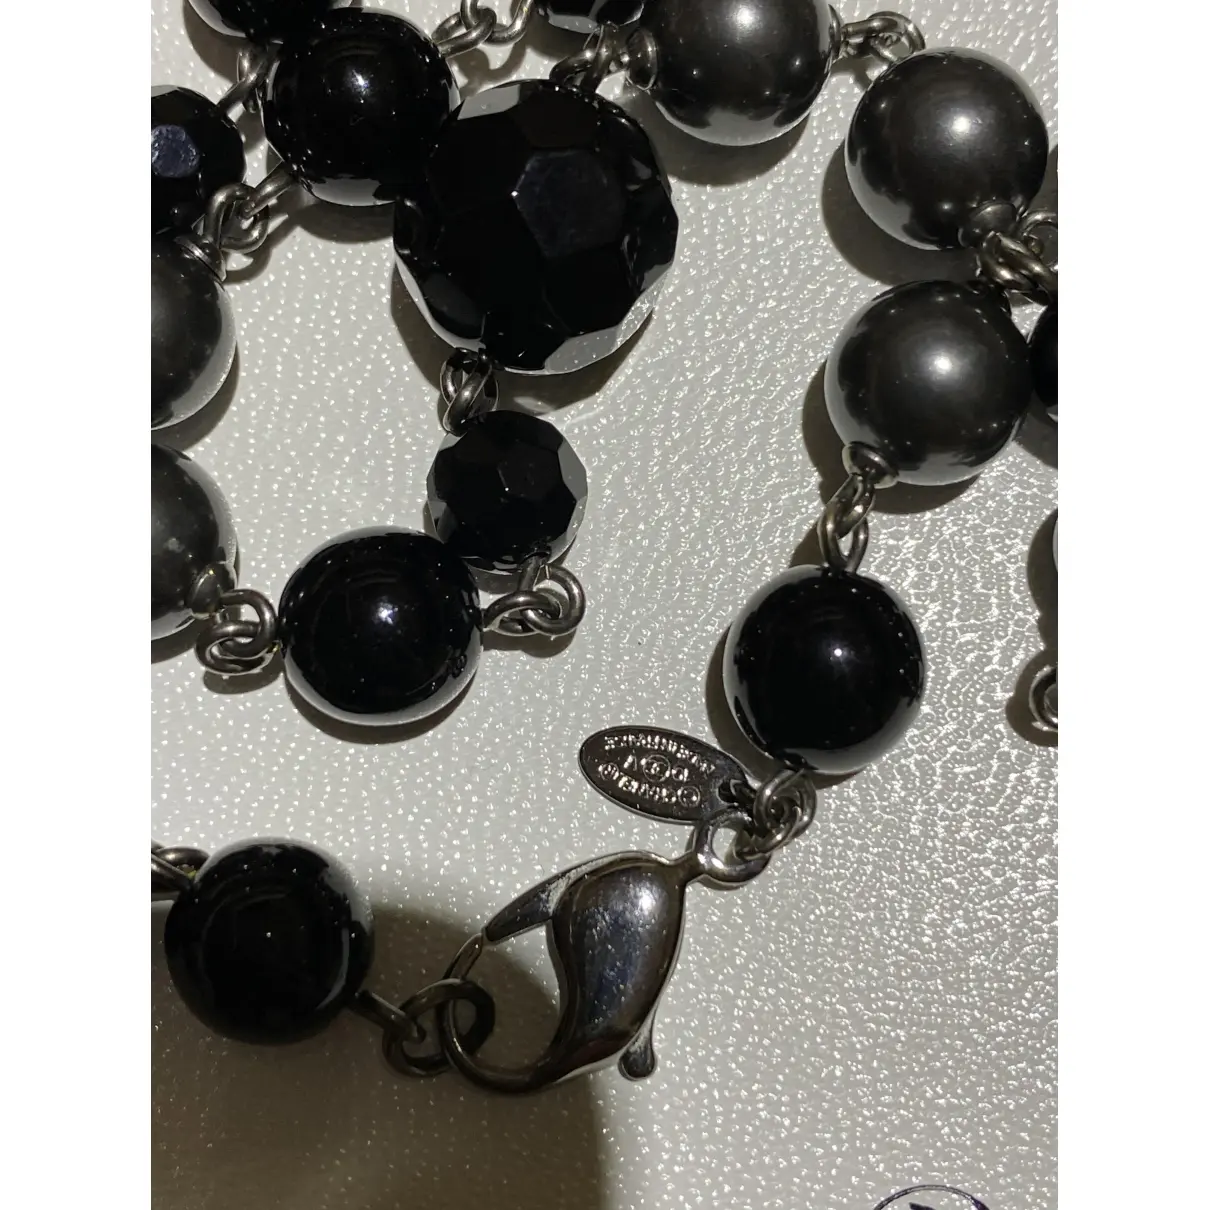 Pearls long necklace Chanel